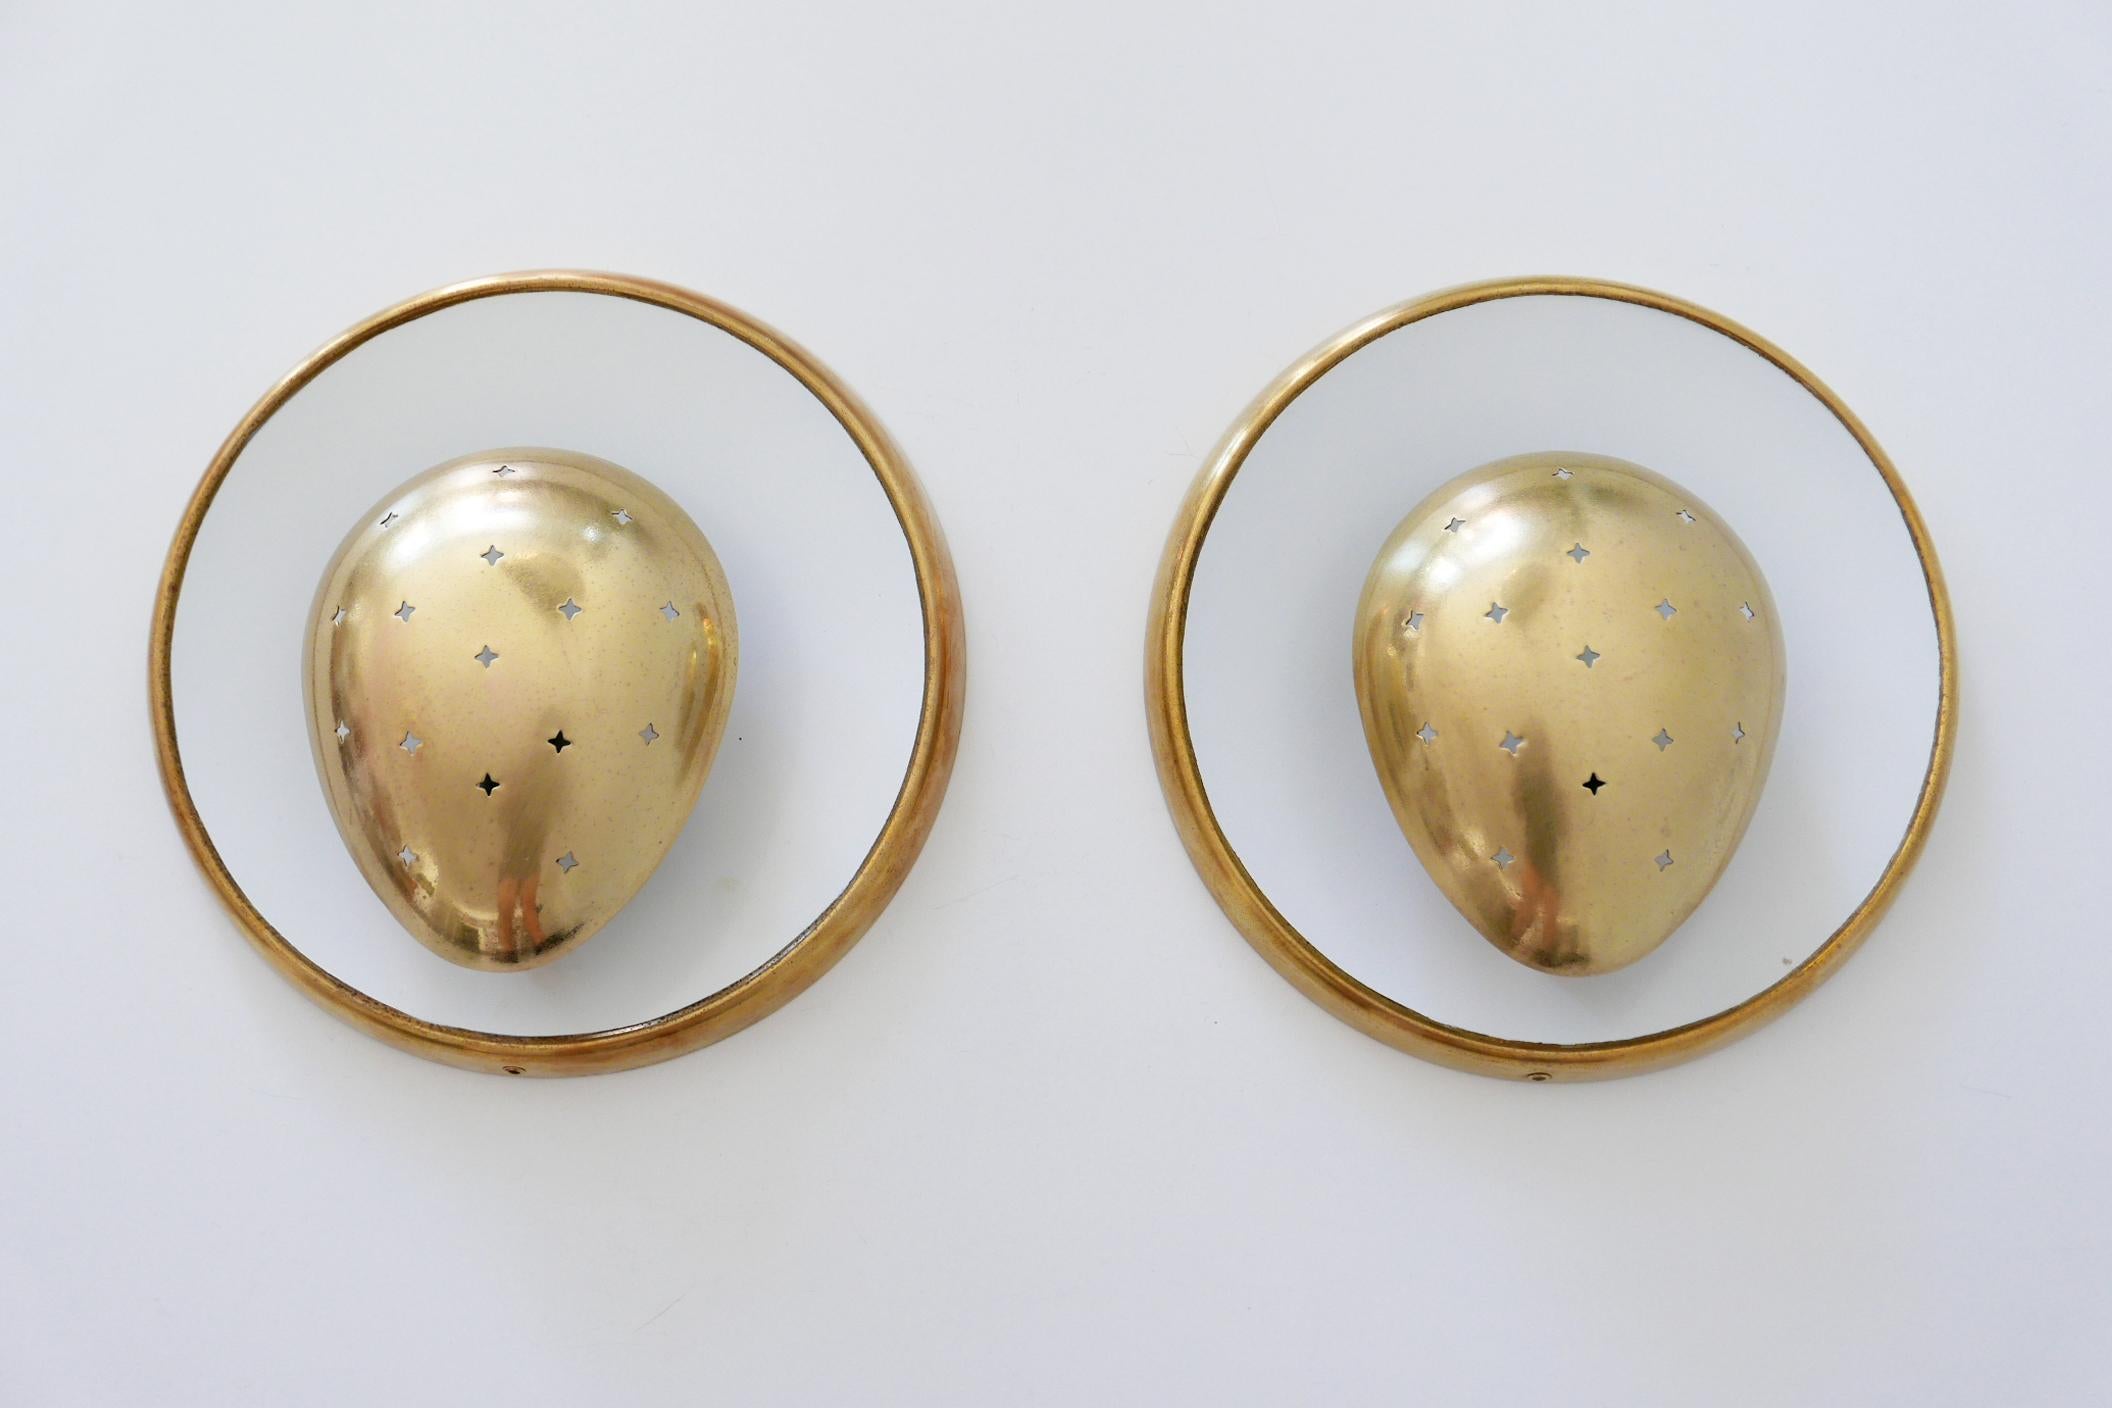 French Set of Two Mid-Century Modern Sputnik Brass Wall Lamps or Sconces, 1950s, France